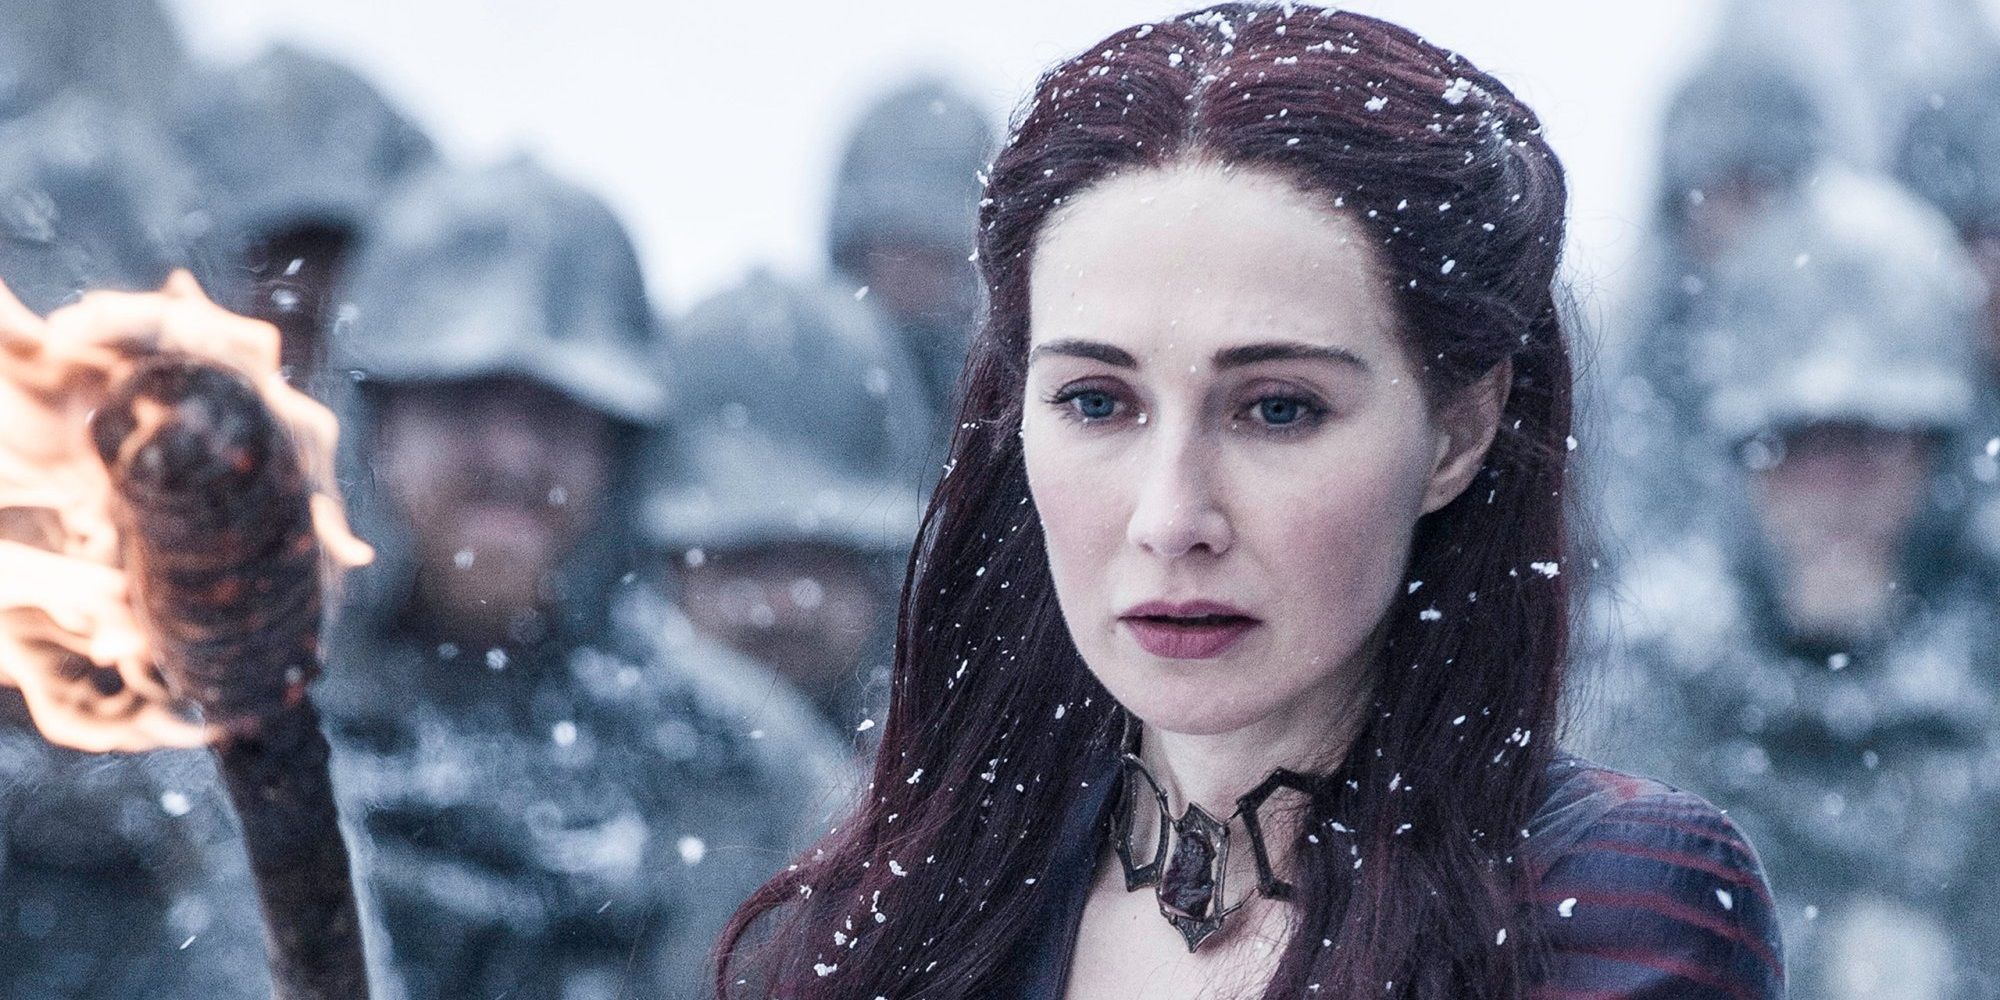 Melisandre played by Carice Van Houten sacrificing to R'hllor on Game of Thrones